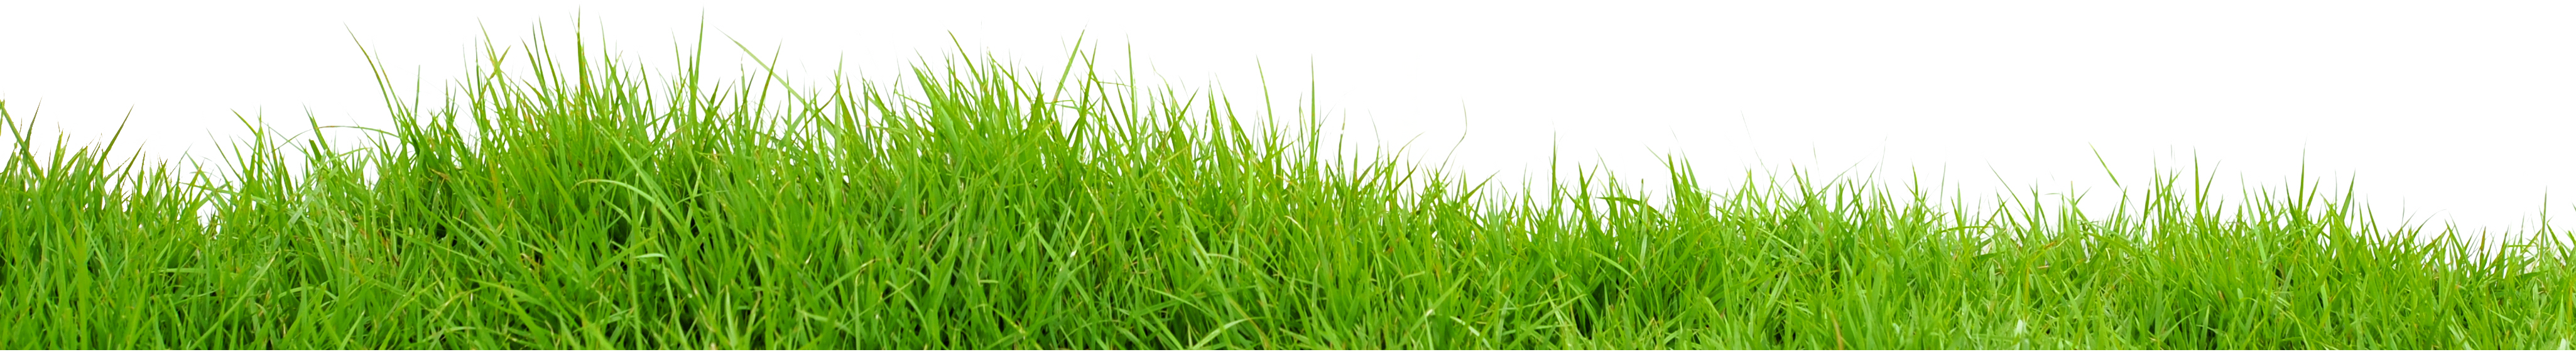 Download Grass PNG Image for Free